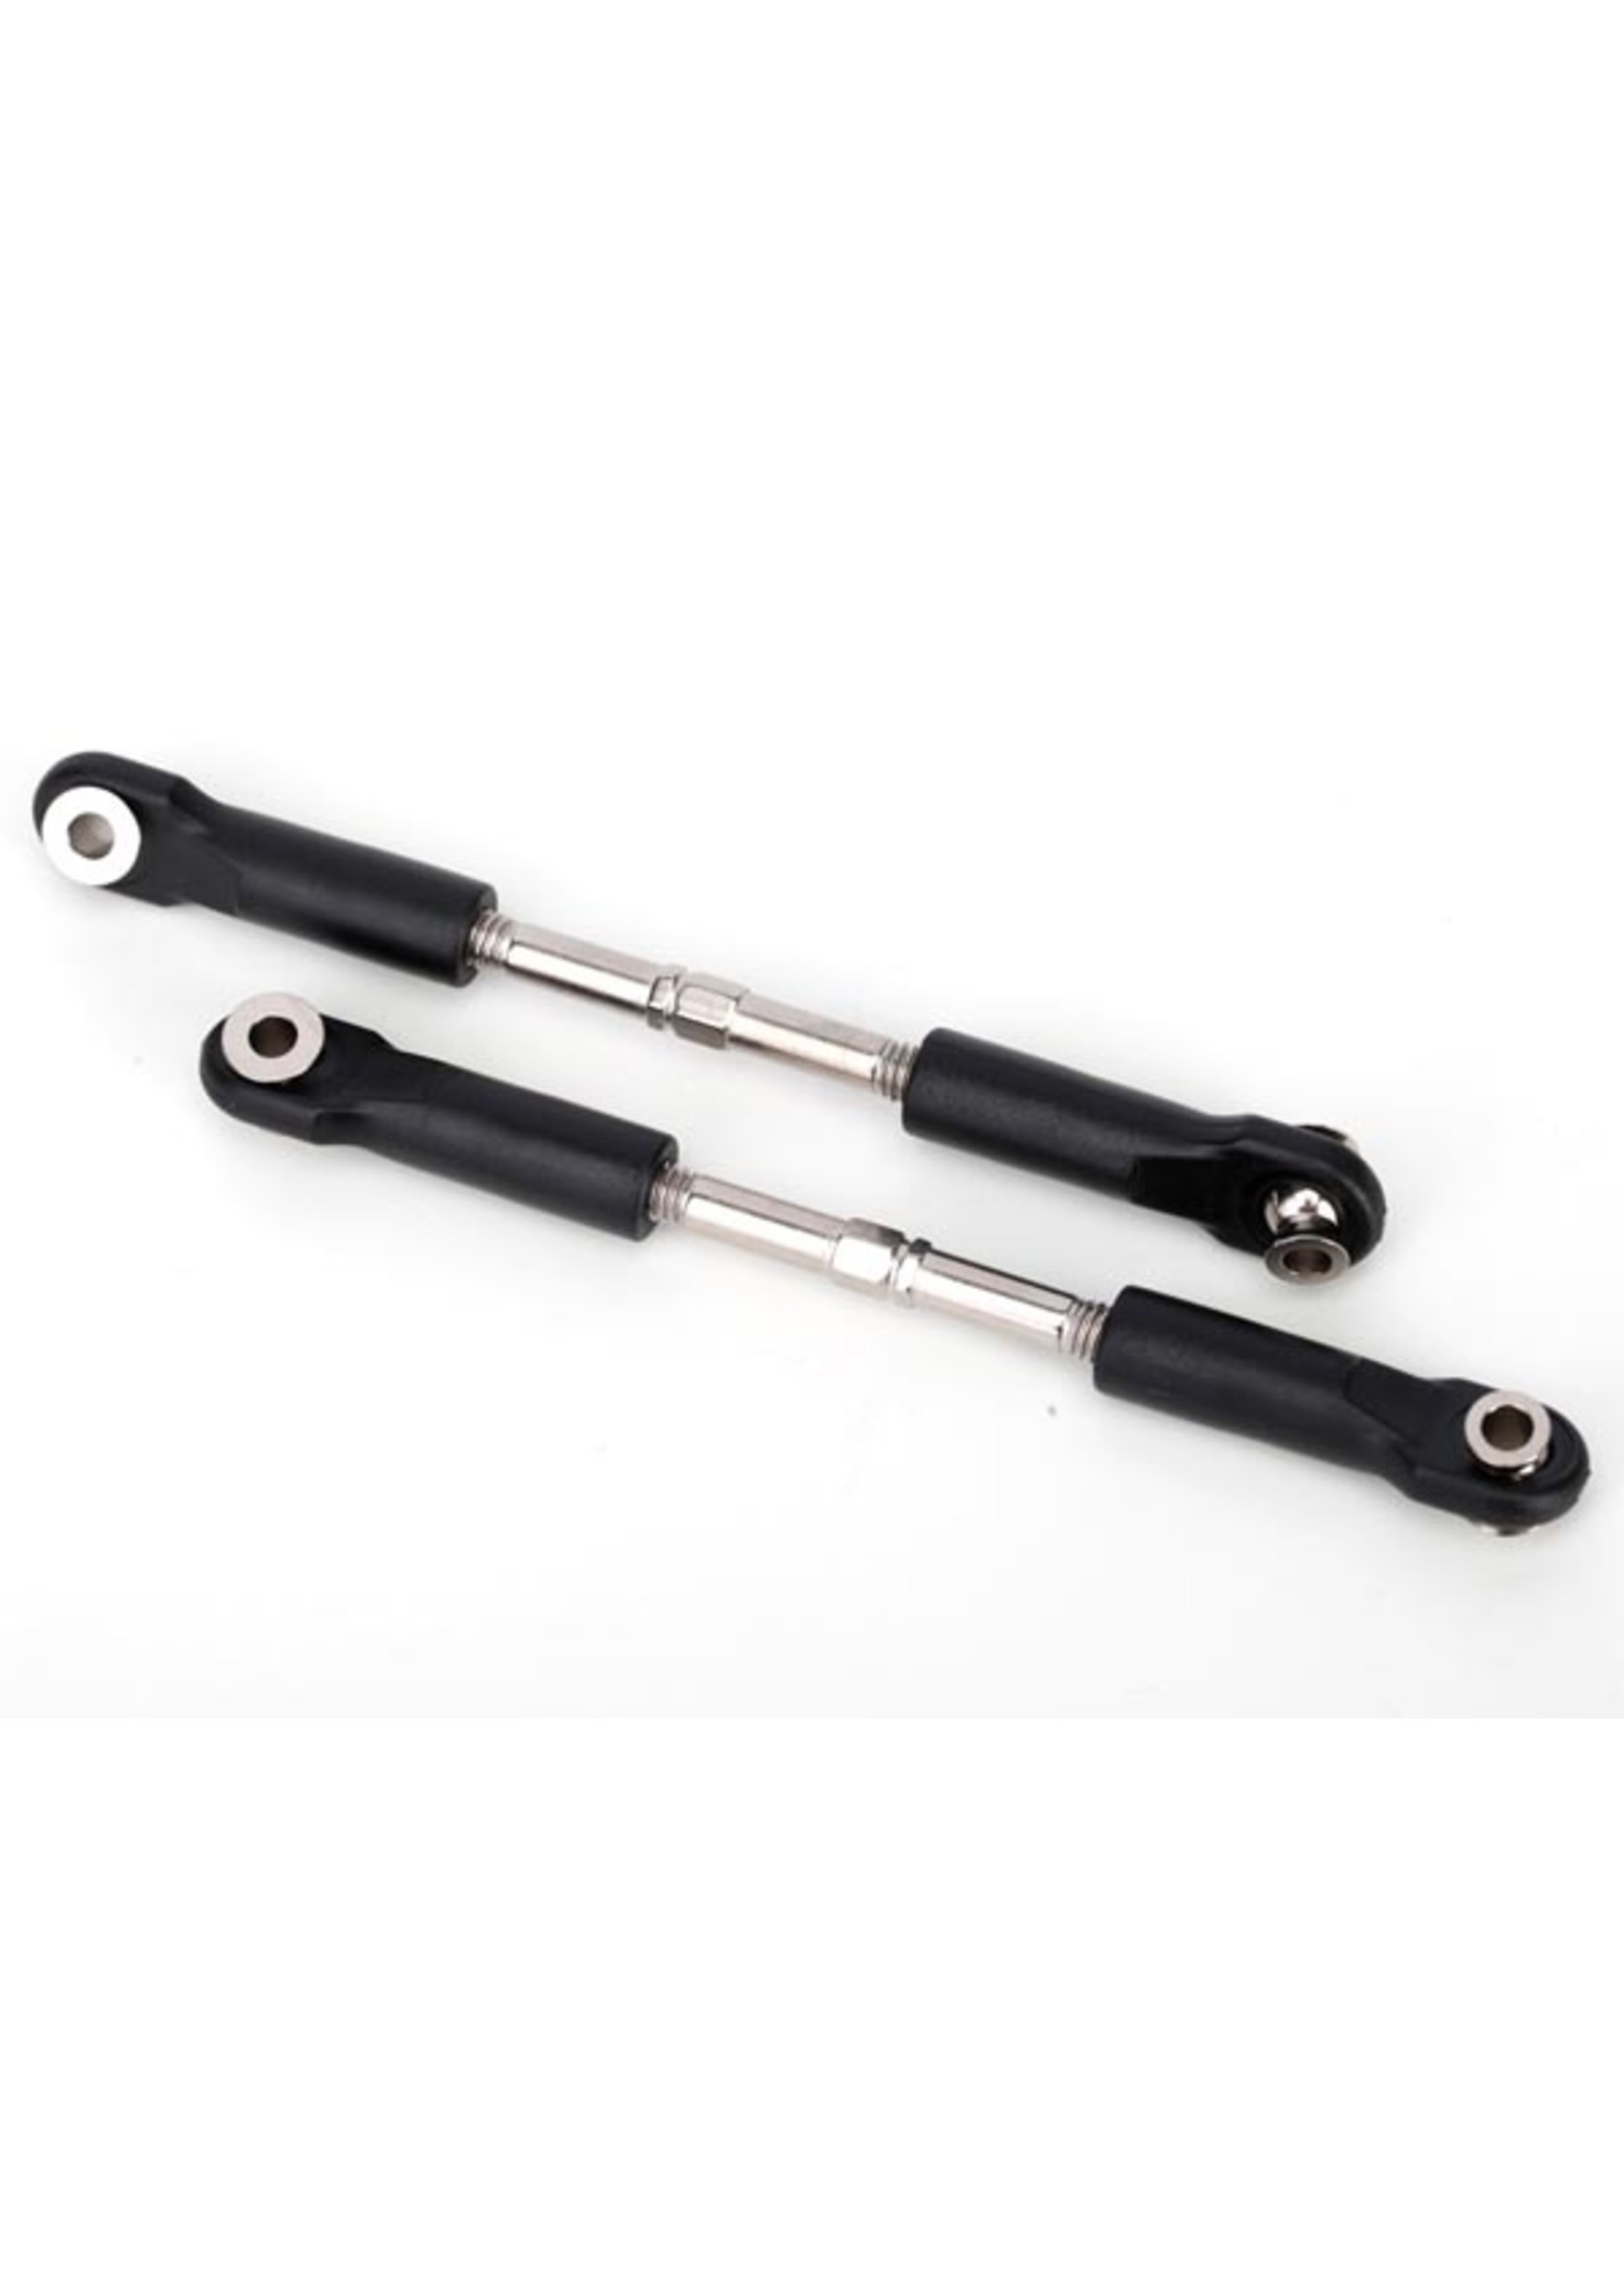 Traxxas 3643 - 49mm Camber Link Turnbuckles (2)